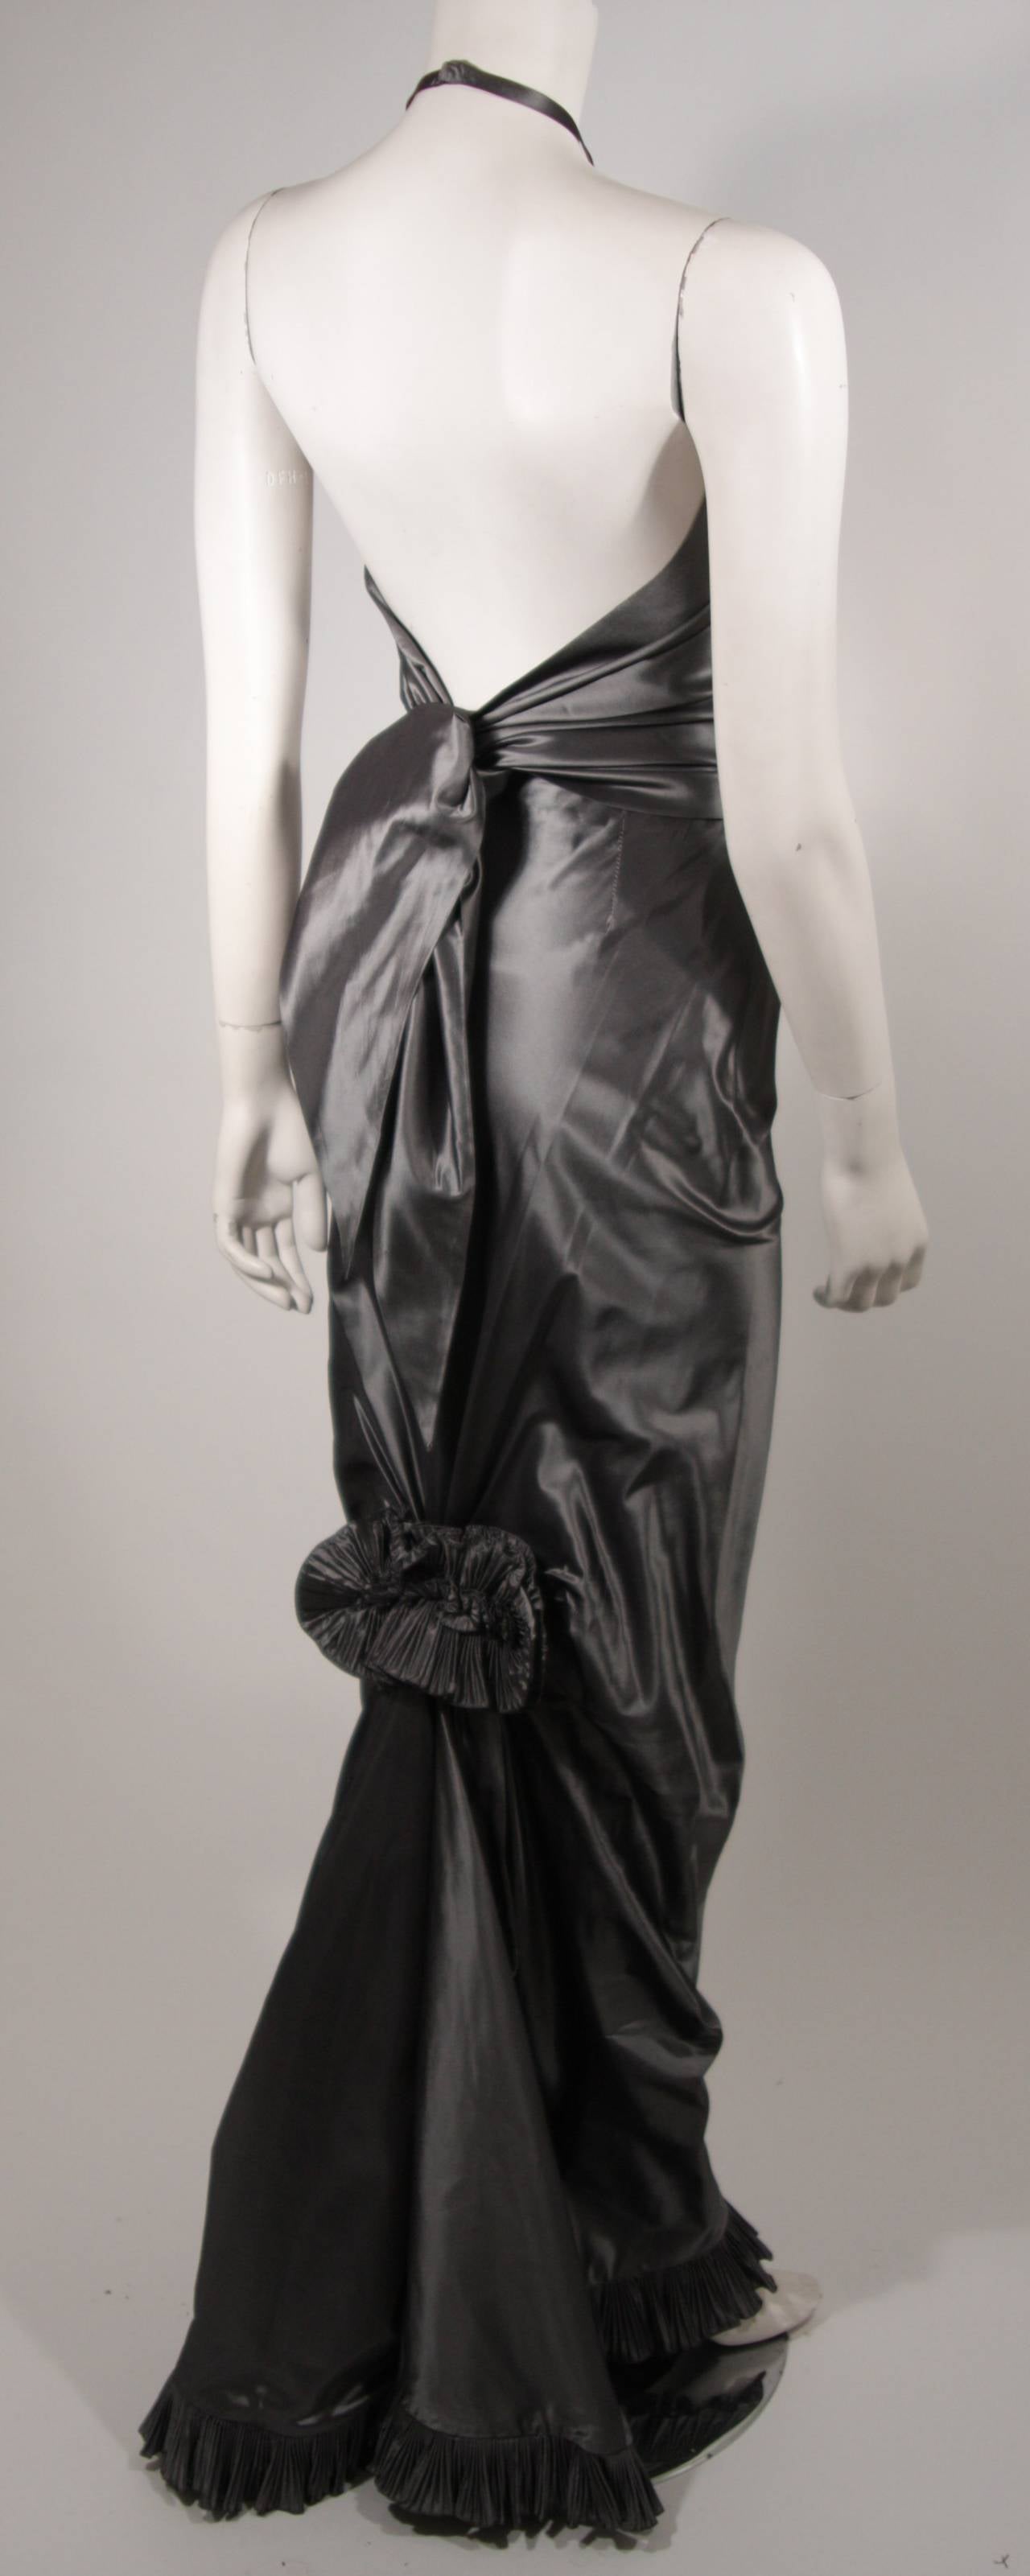 This stunning Oscar De La Renta evening ensemble is composed of a beautiful silver metallic fabric. The halter top has an over sized tie detail. The skirt features a slim cut which is accentuated at the knee by a floral ruffle that culminates into a